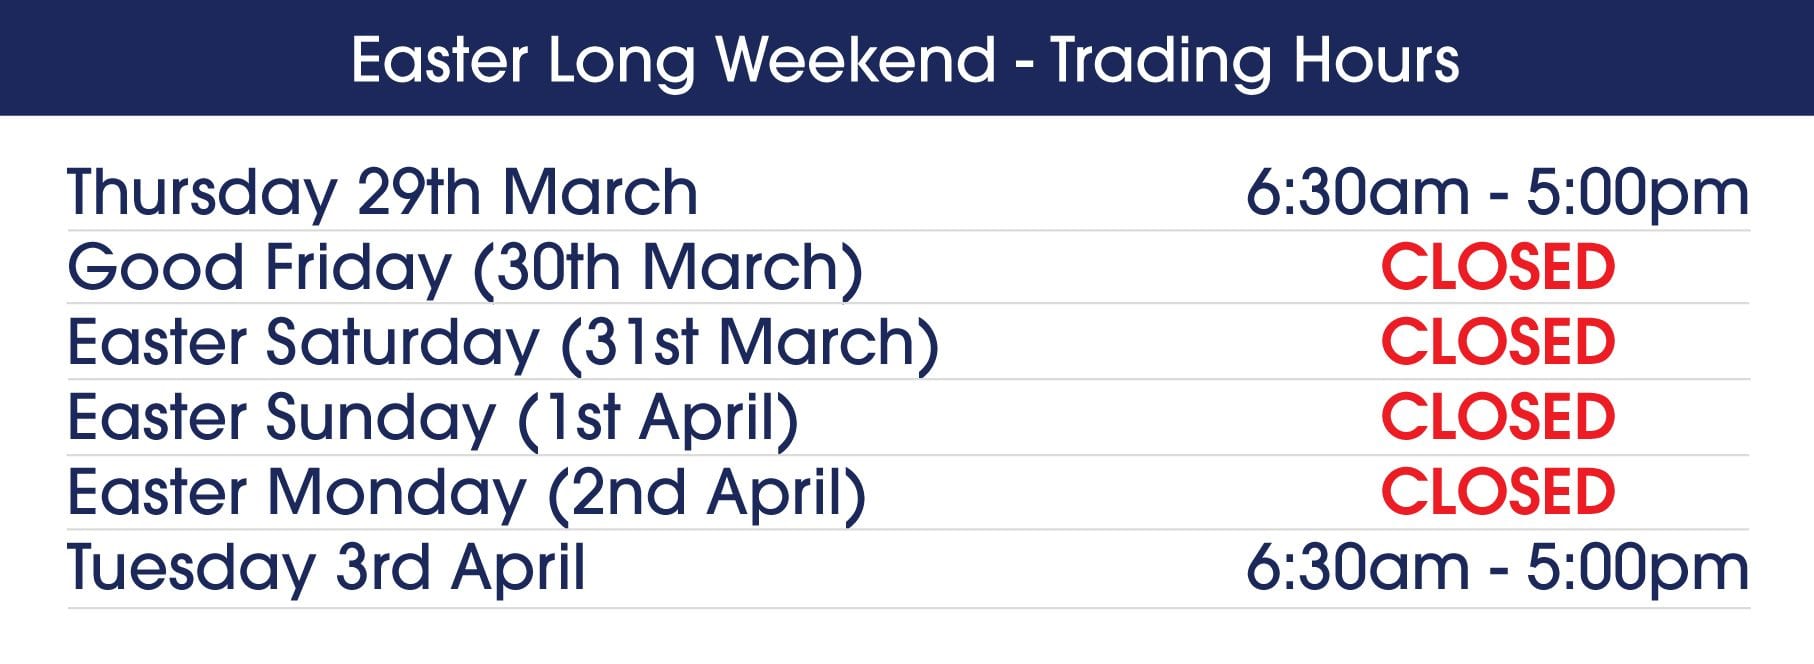 easter-trading-hours-2018